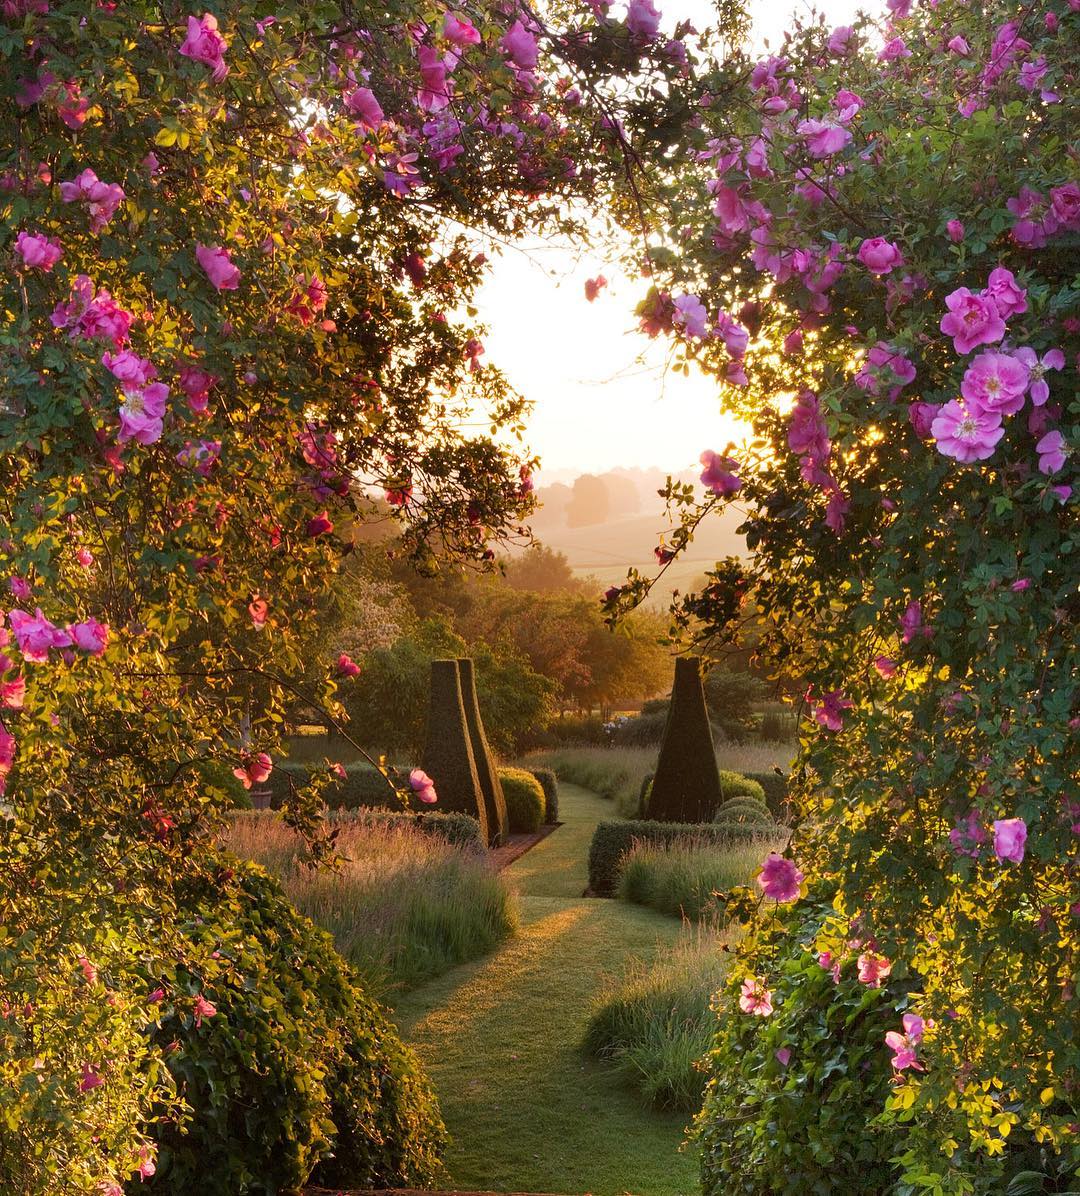 Clive Nichols Captures Marvelous Gardens You'll Want to Get Lost in Pettifers